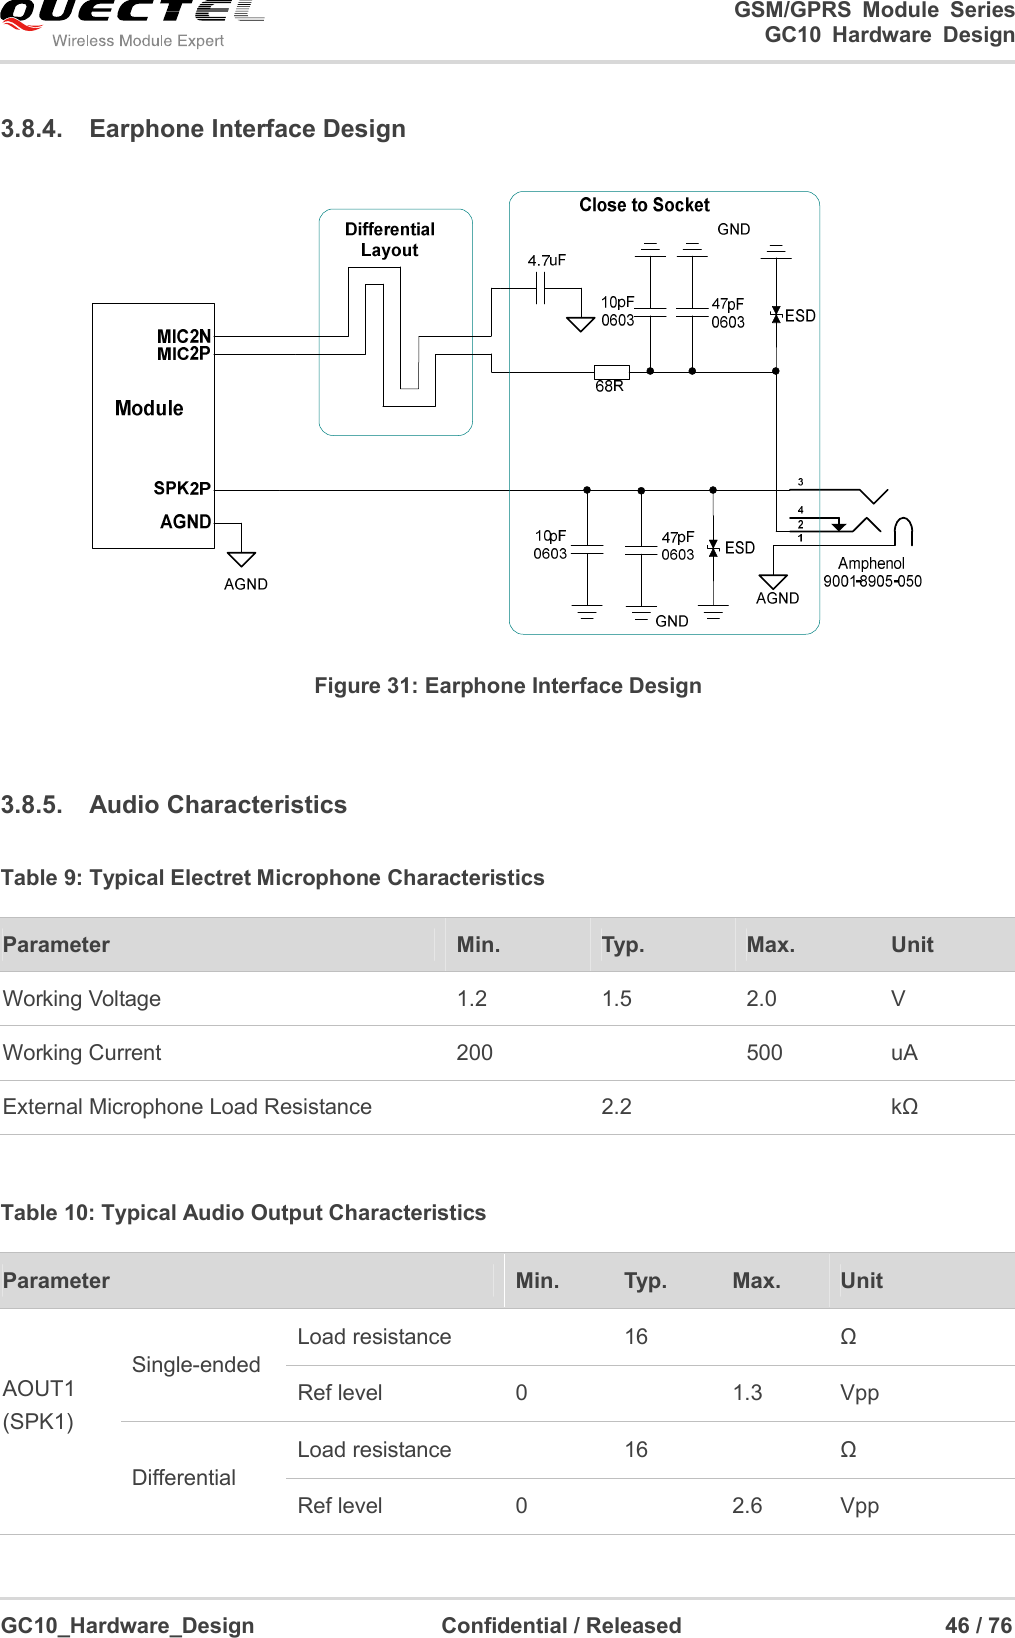                                                                          GSM/GPRS  Module  Series                                                                 GC10 Hardware Design  GC10_Hardware_Design                                  Confidential / Released                                                46 / 76      3.8.4.  Earphone Interface Design  Figure 31: Earphone Interface Design  3.8.5.  Audio Characteristics Table 9: Typical Electret Microphone Characteristics  Table 10: Typical Audio Output Characteristics Parameter  Min.  Typ.  Max.  Unit Working Voltage  1.2  1.5  2.0  V Working Current  200    500  uA External Microphone Load Resistance    2.2    kΩ Parameter  Min.  Typ.  Max.  Unit AOUT1 (SPK1)  Single-ended  Load resistance    16    Ω Ref level  0    1.3  Vpp Differential Load resistance    16    Ω Ref level  0    2.6  Vpp 